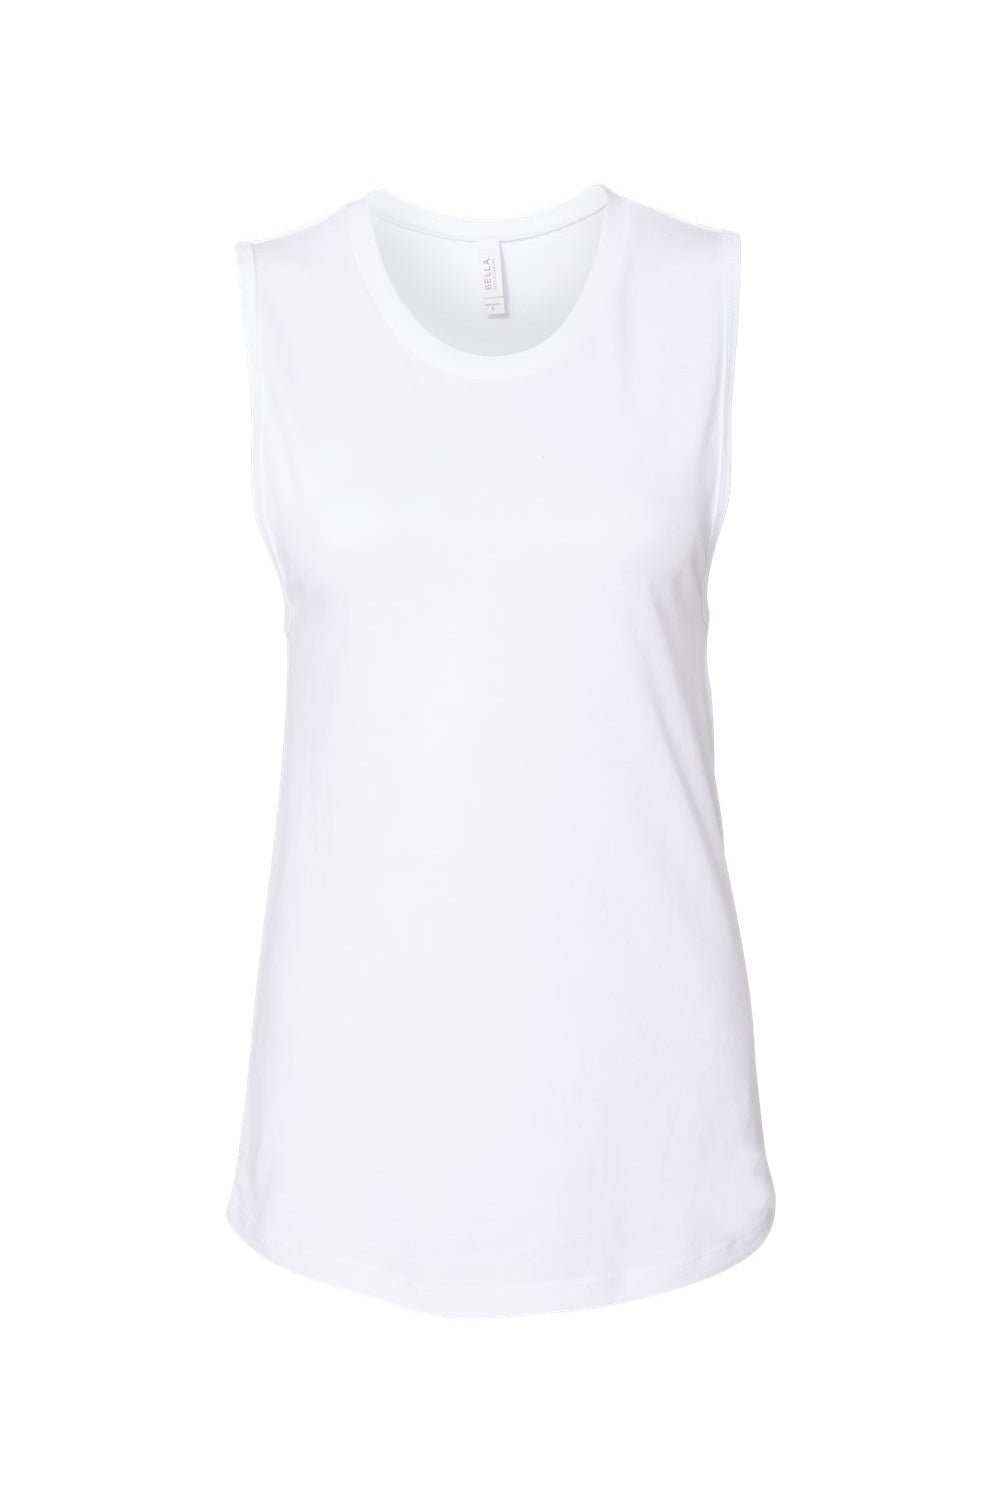 Bella + Canvas BC6003/B6003/6003 Womens Jersey Muscle Tank Top White Flat Front